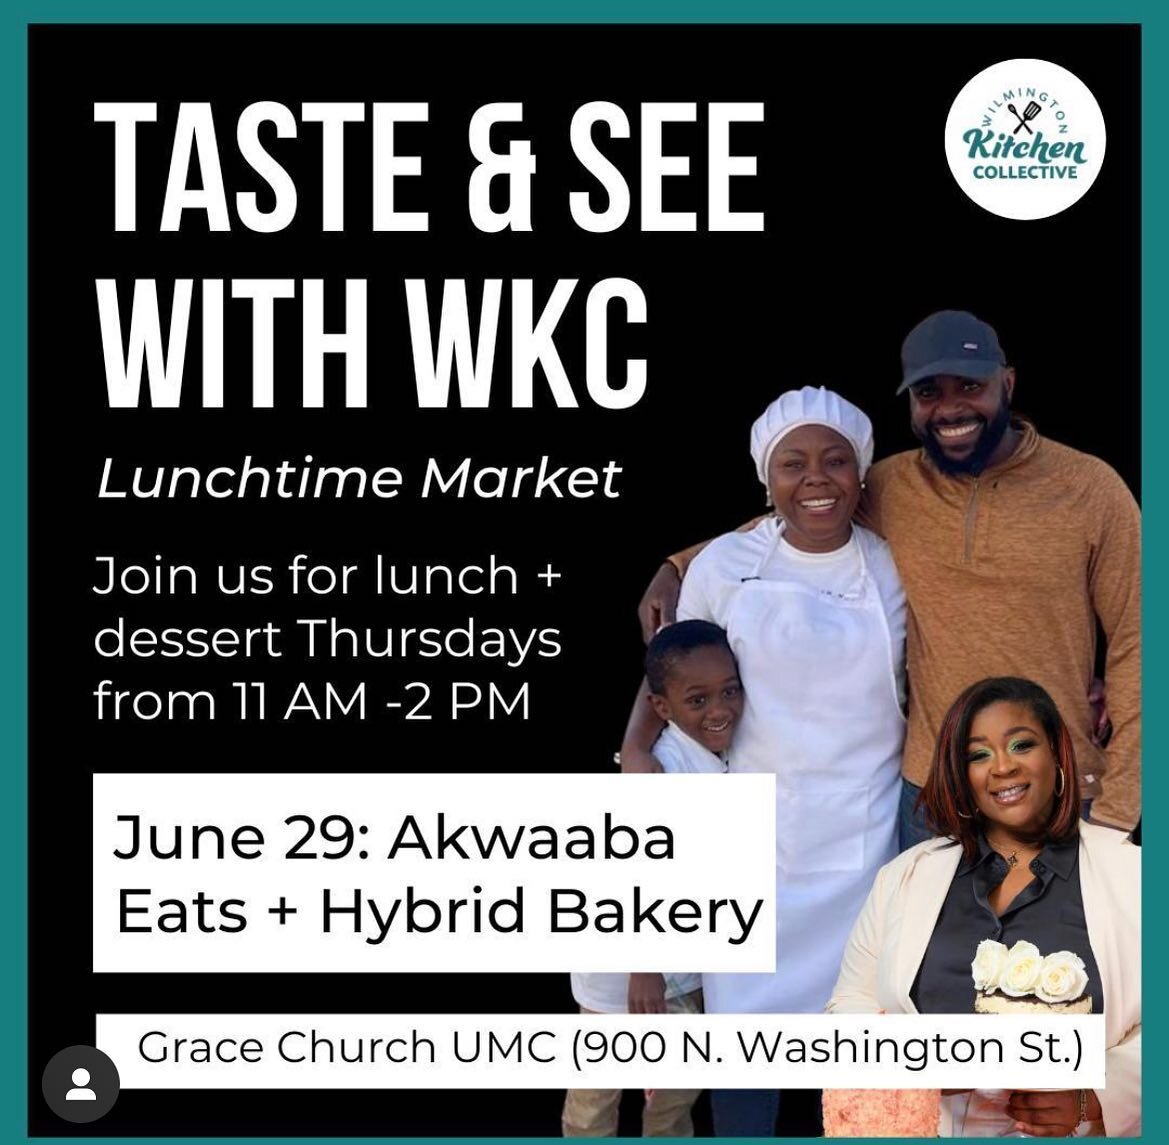 have you joined us for lunch on thursdays yet with @wilmingtonkitchencollective ? 11am -2pm at Grace Church we have local food businesses courtesy of @wilmingtonkitchencollective serving up DELICIOUSNESS🥪🌭🌯🍔 while we curate the music 🎶

This wee